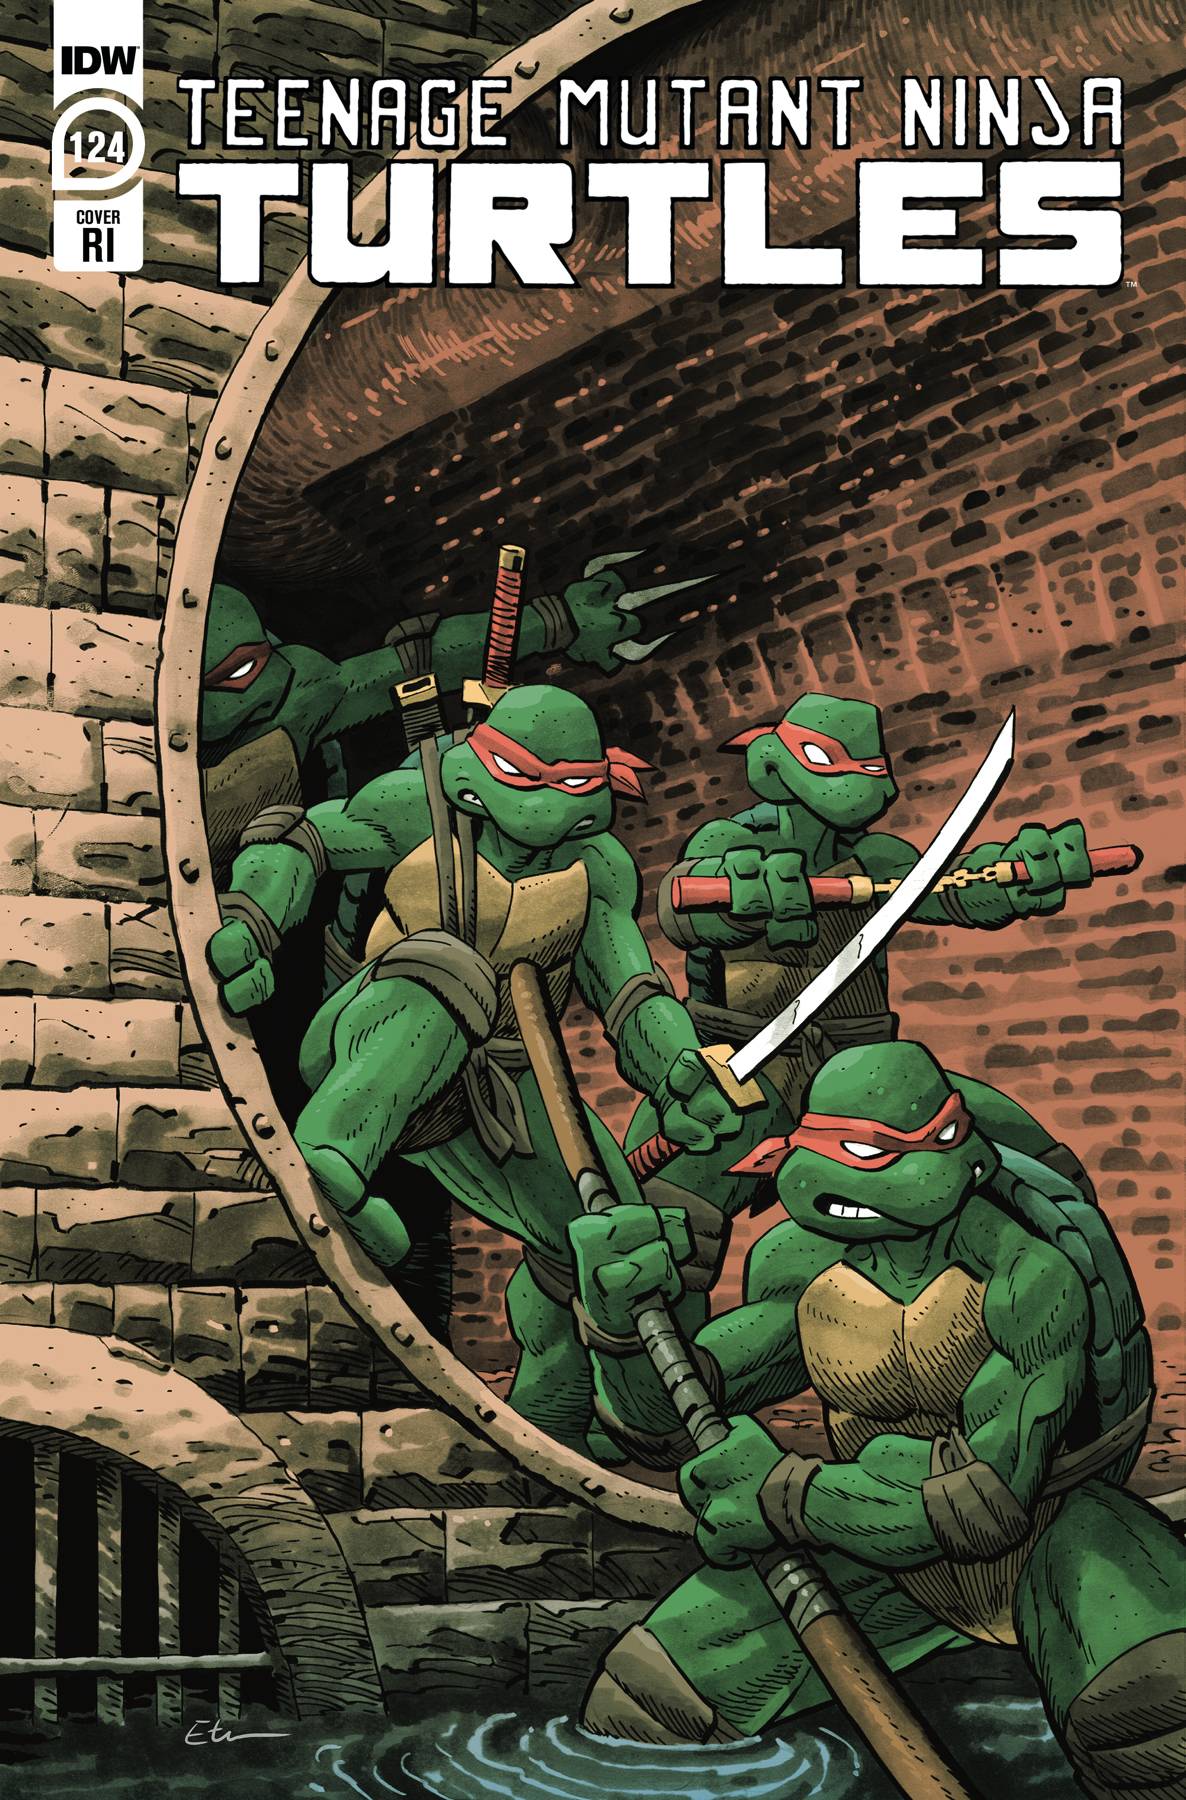 12 Days of Downloads 2022 – Day 8: TMNT Cartoon and Comic Book Visual Guide  –